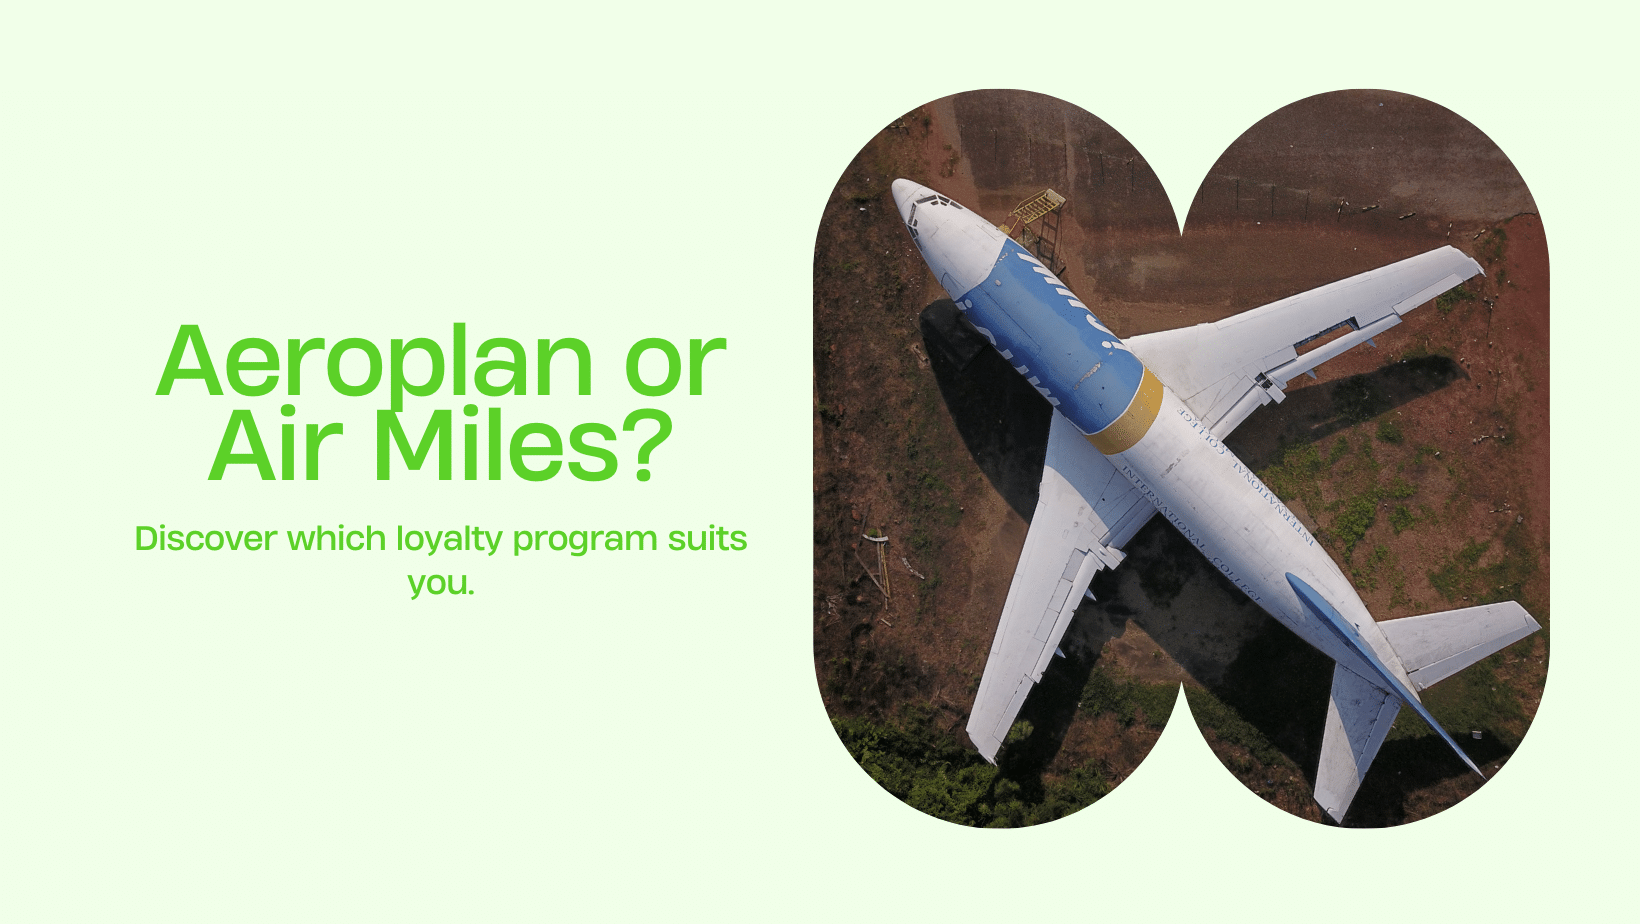 Which one is better? Aeroplan or Air Miles?